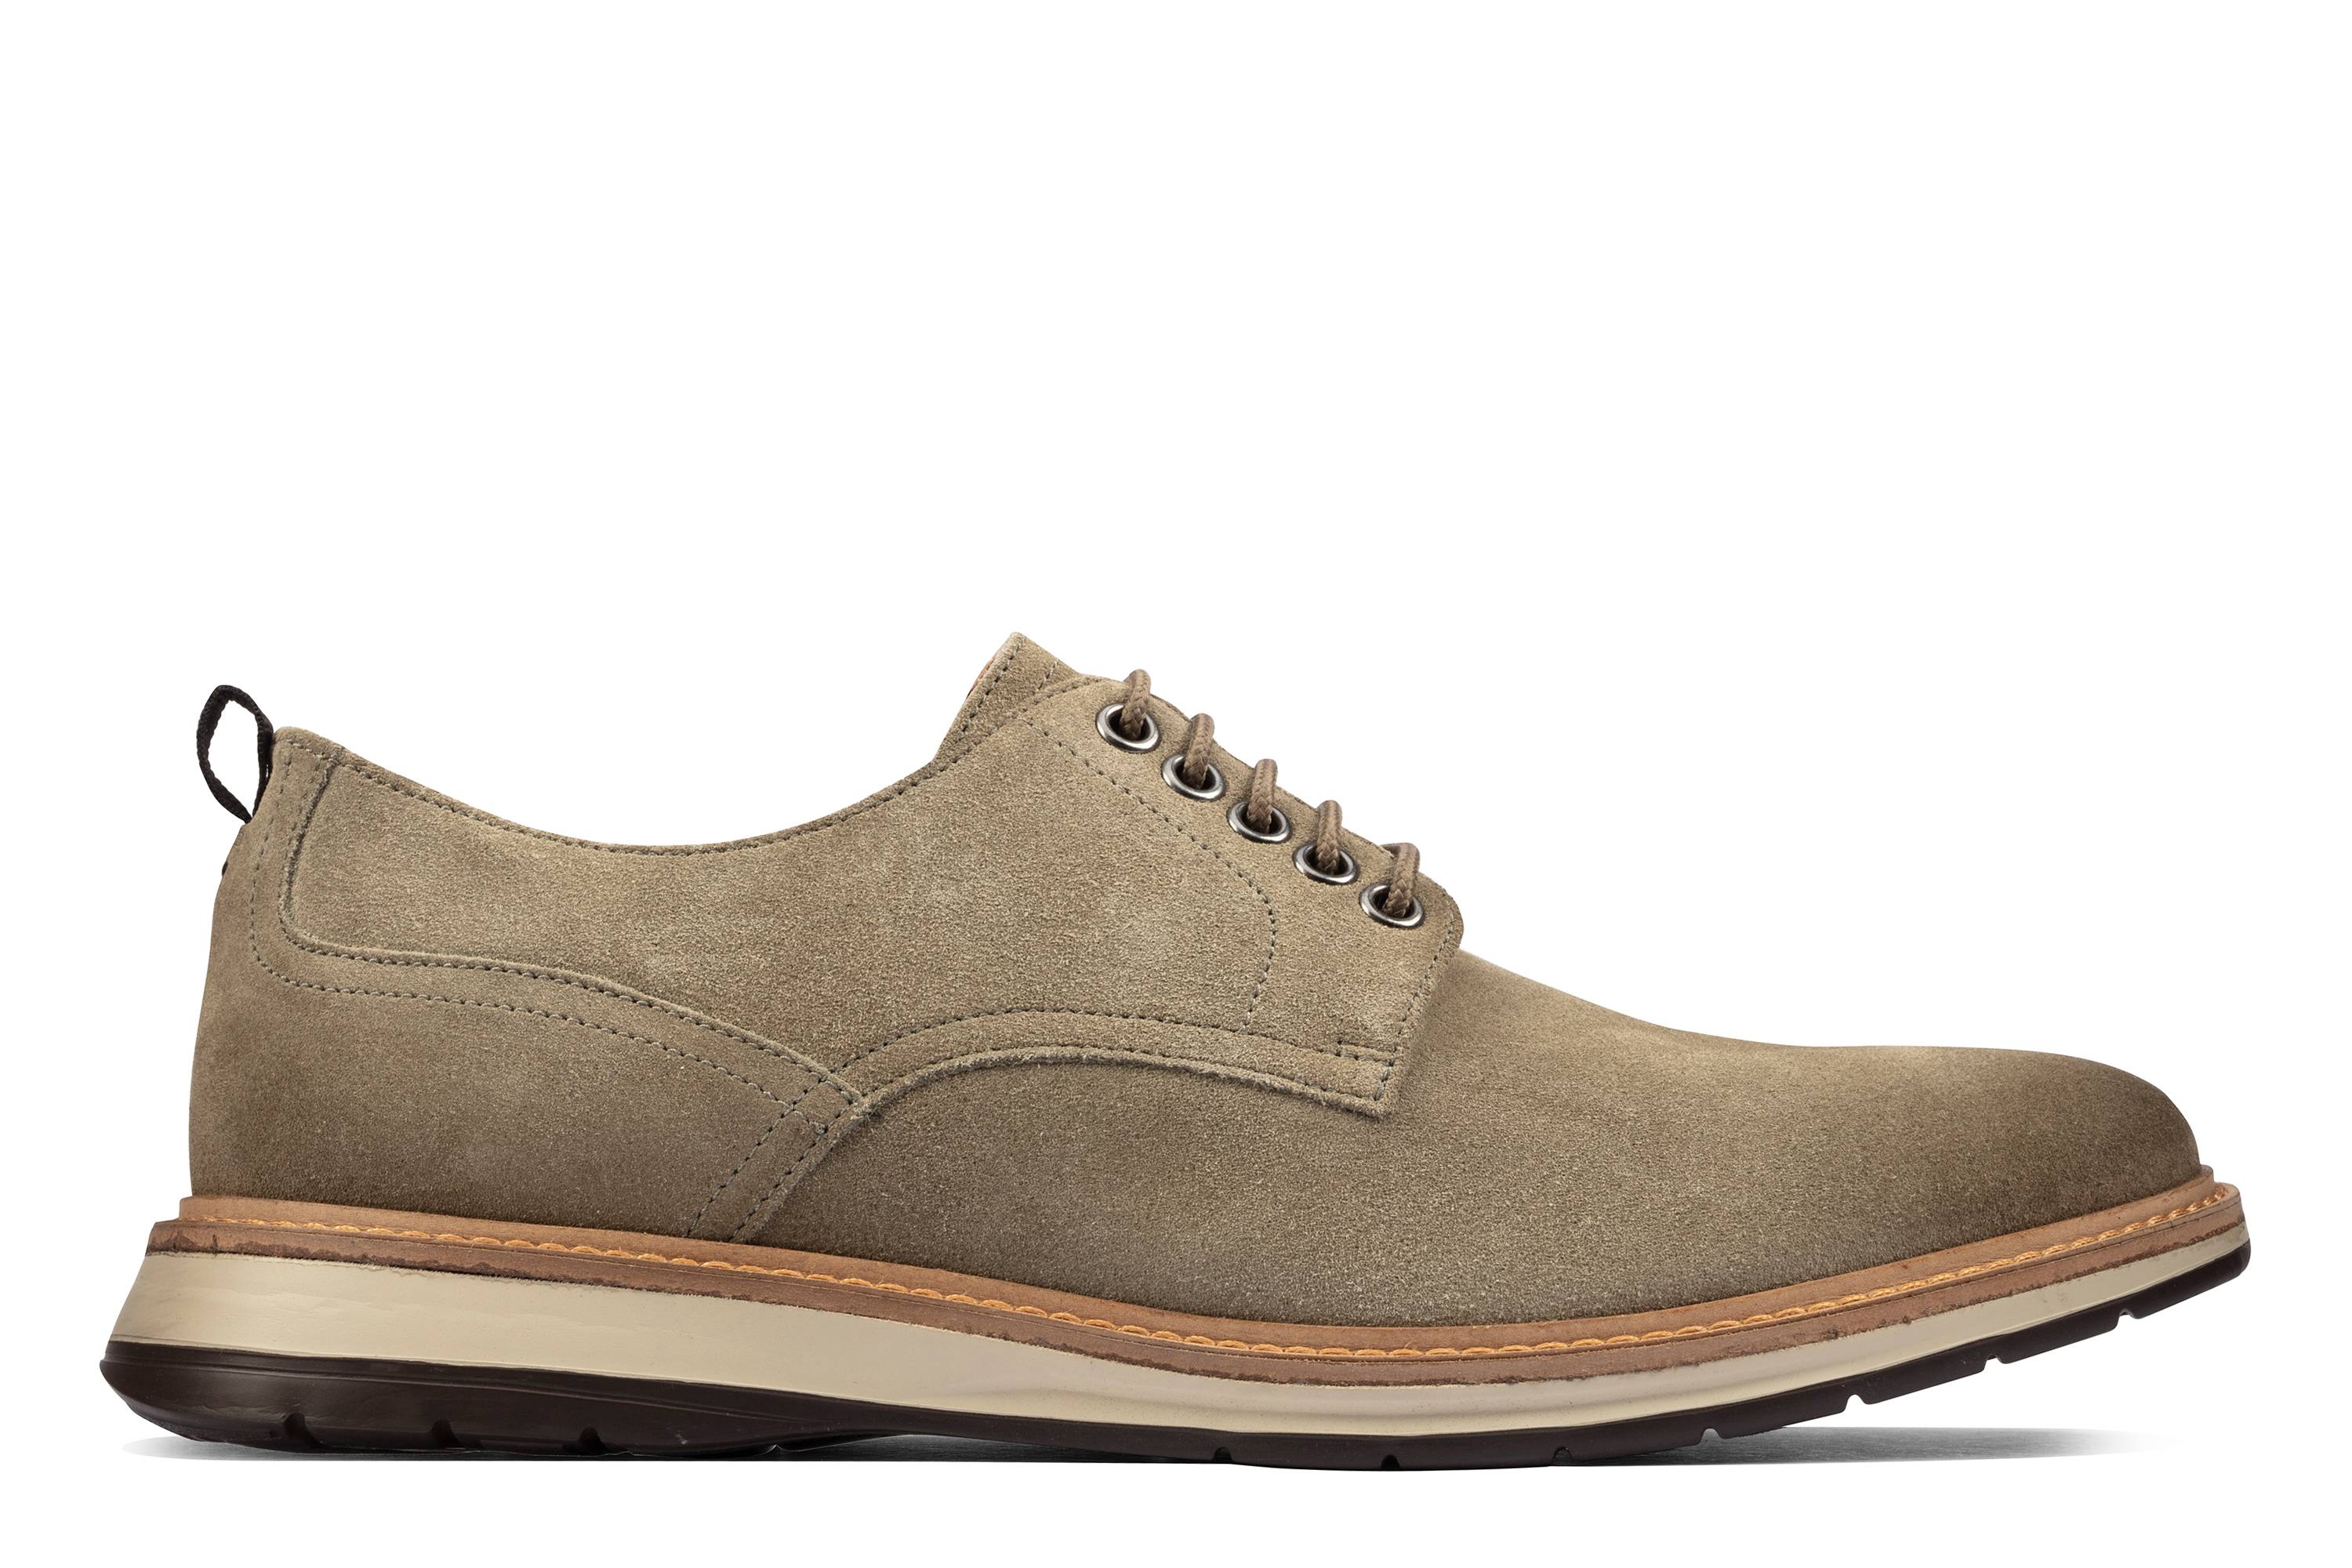 Men :: SHOES :: Casual :: CHANTRY WALK MENS CLARKS - Clarks Shoes Cyprus